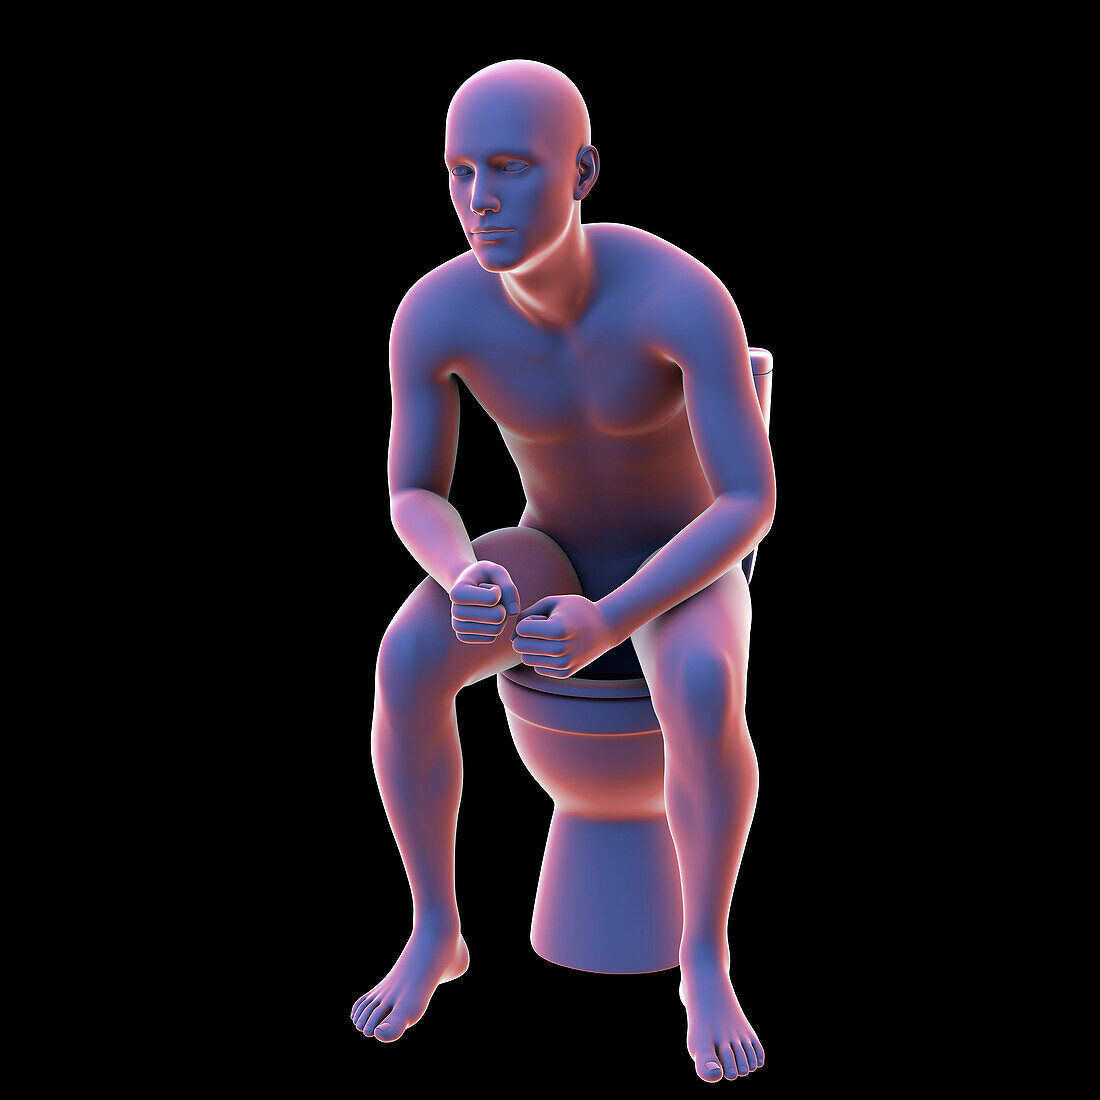 Person experiencing constipation, illustration